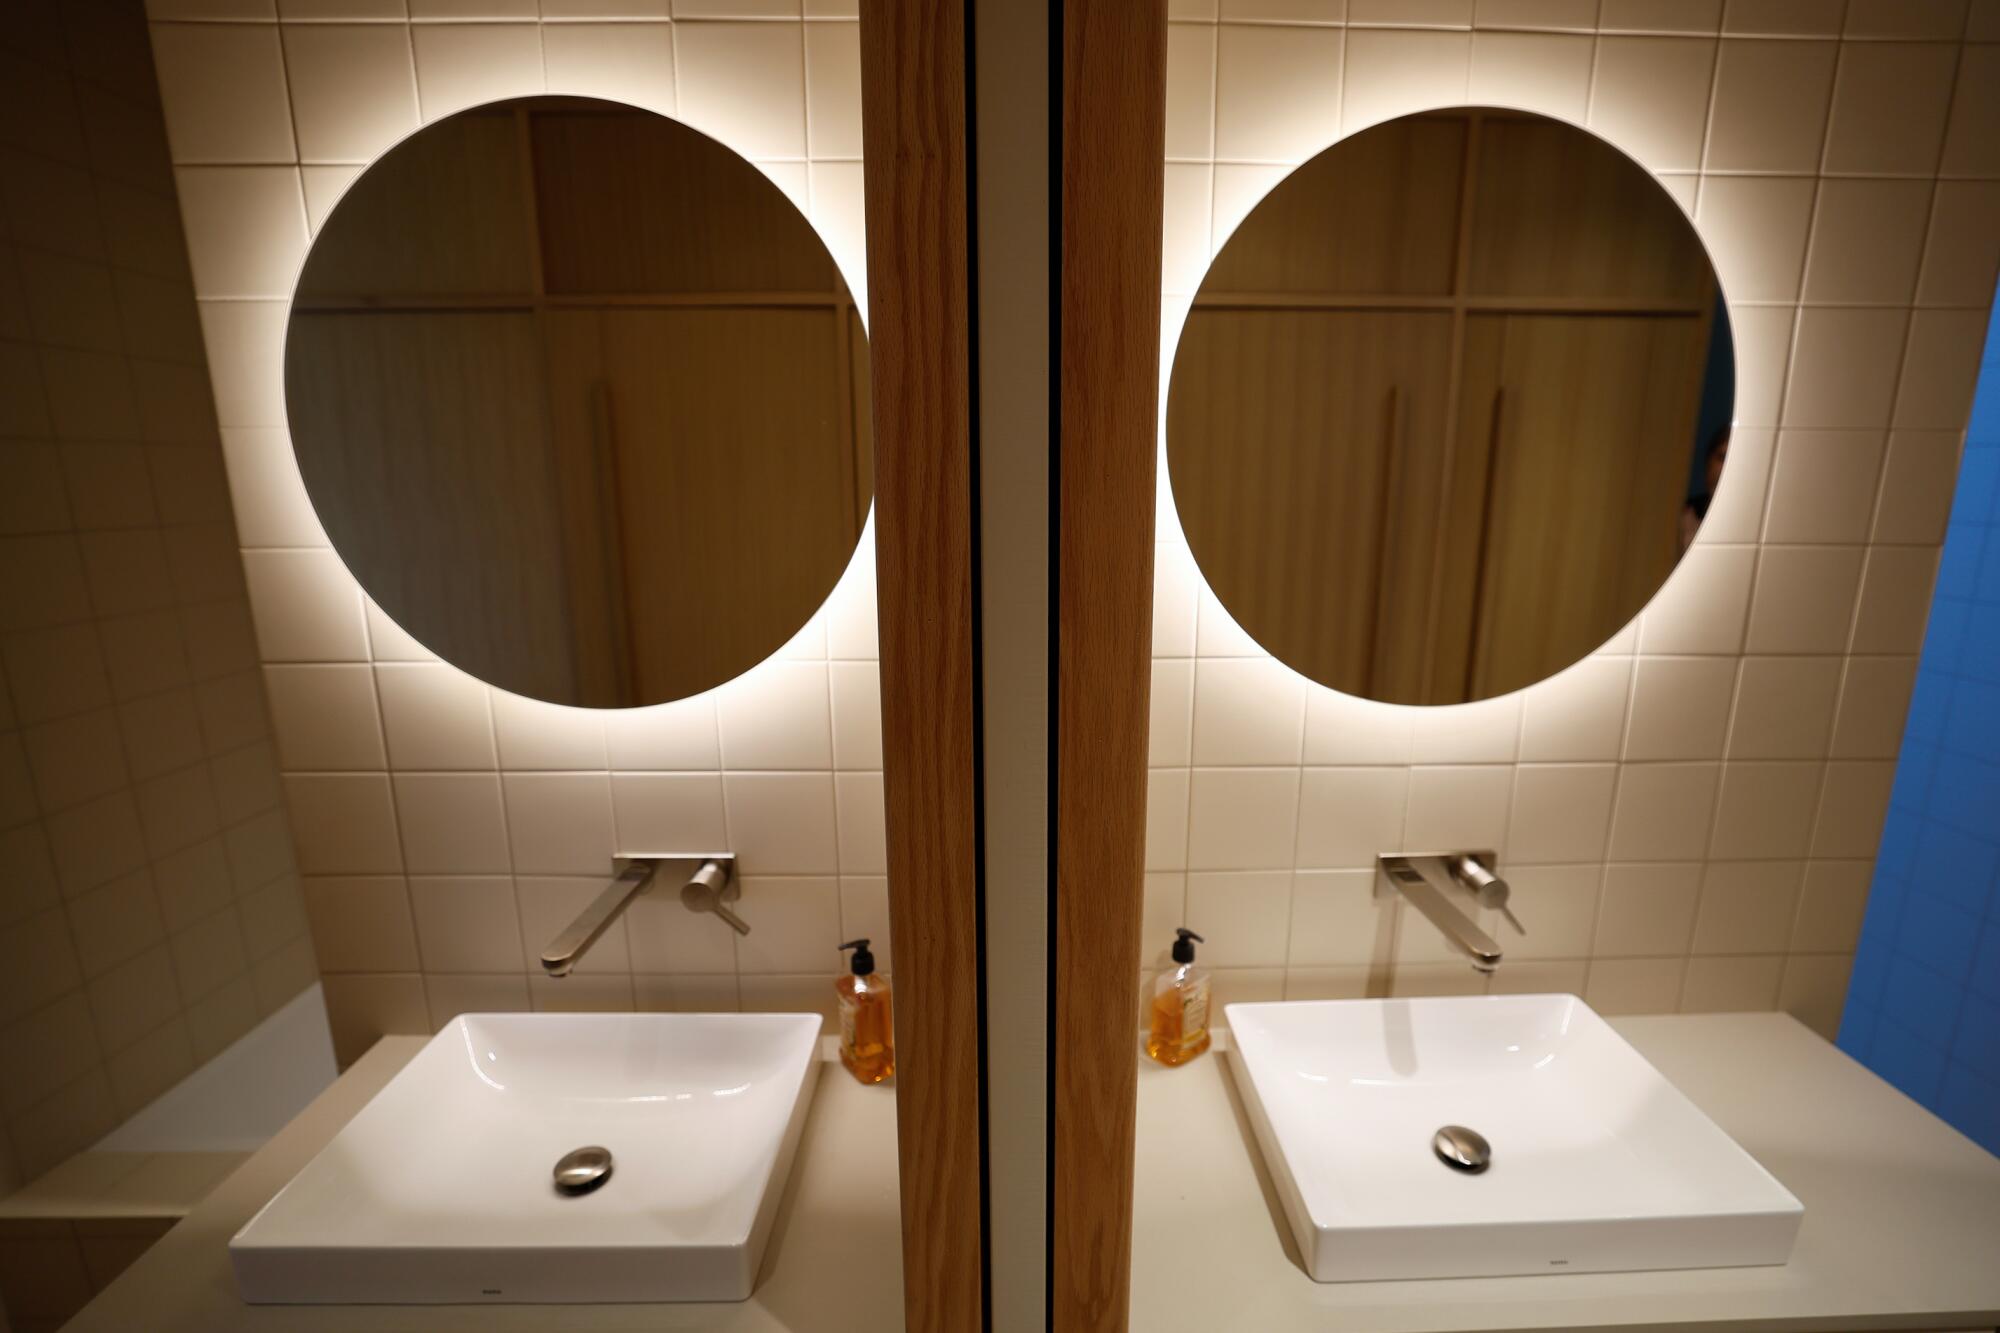 Light shines from behind a mirror above a sink and reflects off a mirror. 